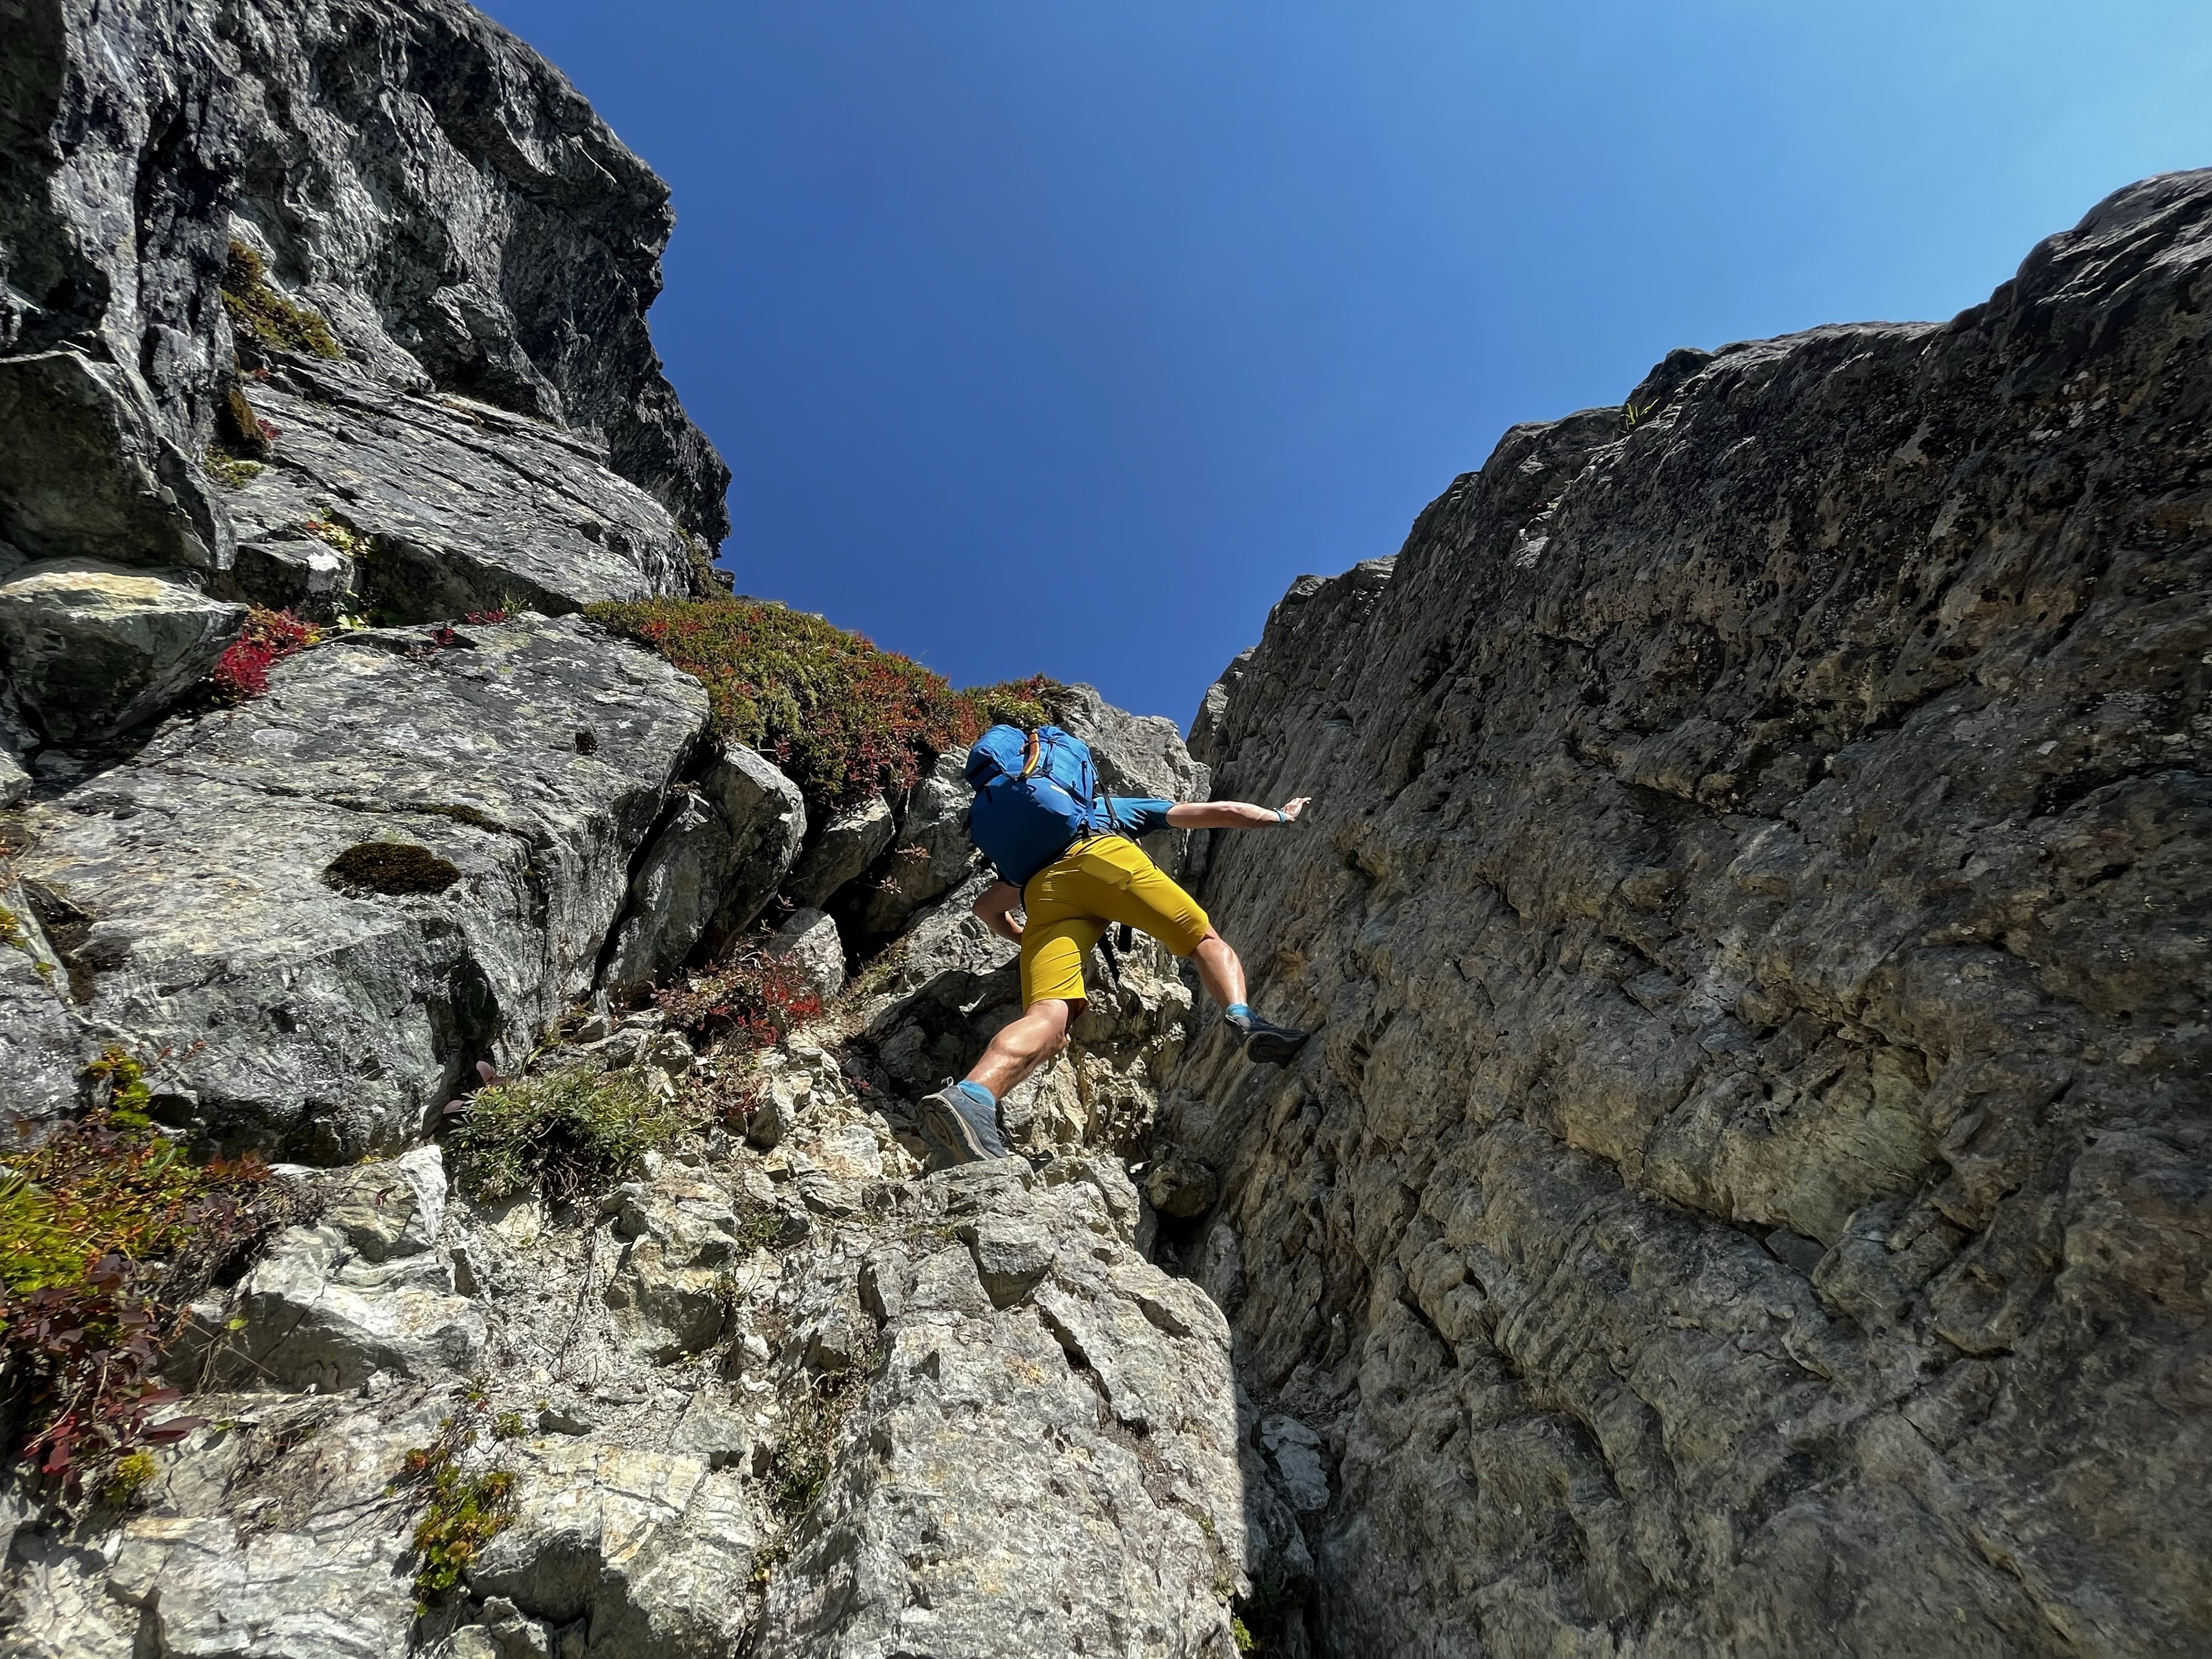 Man climbing rock where two walls meet, in yellow shorts with. abig blue backpack on, no rope. Terrain is not too steep.